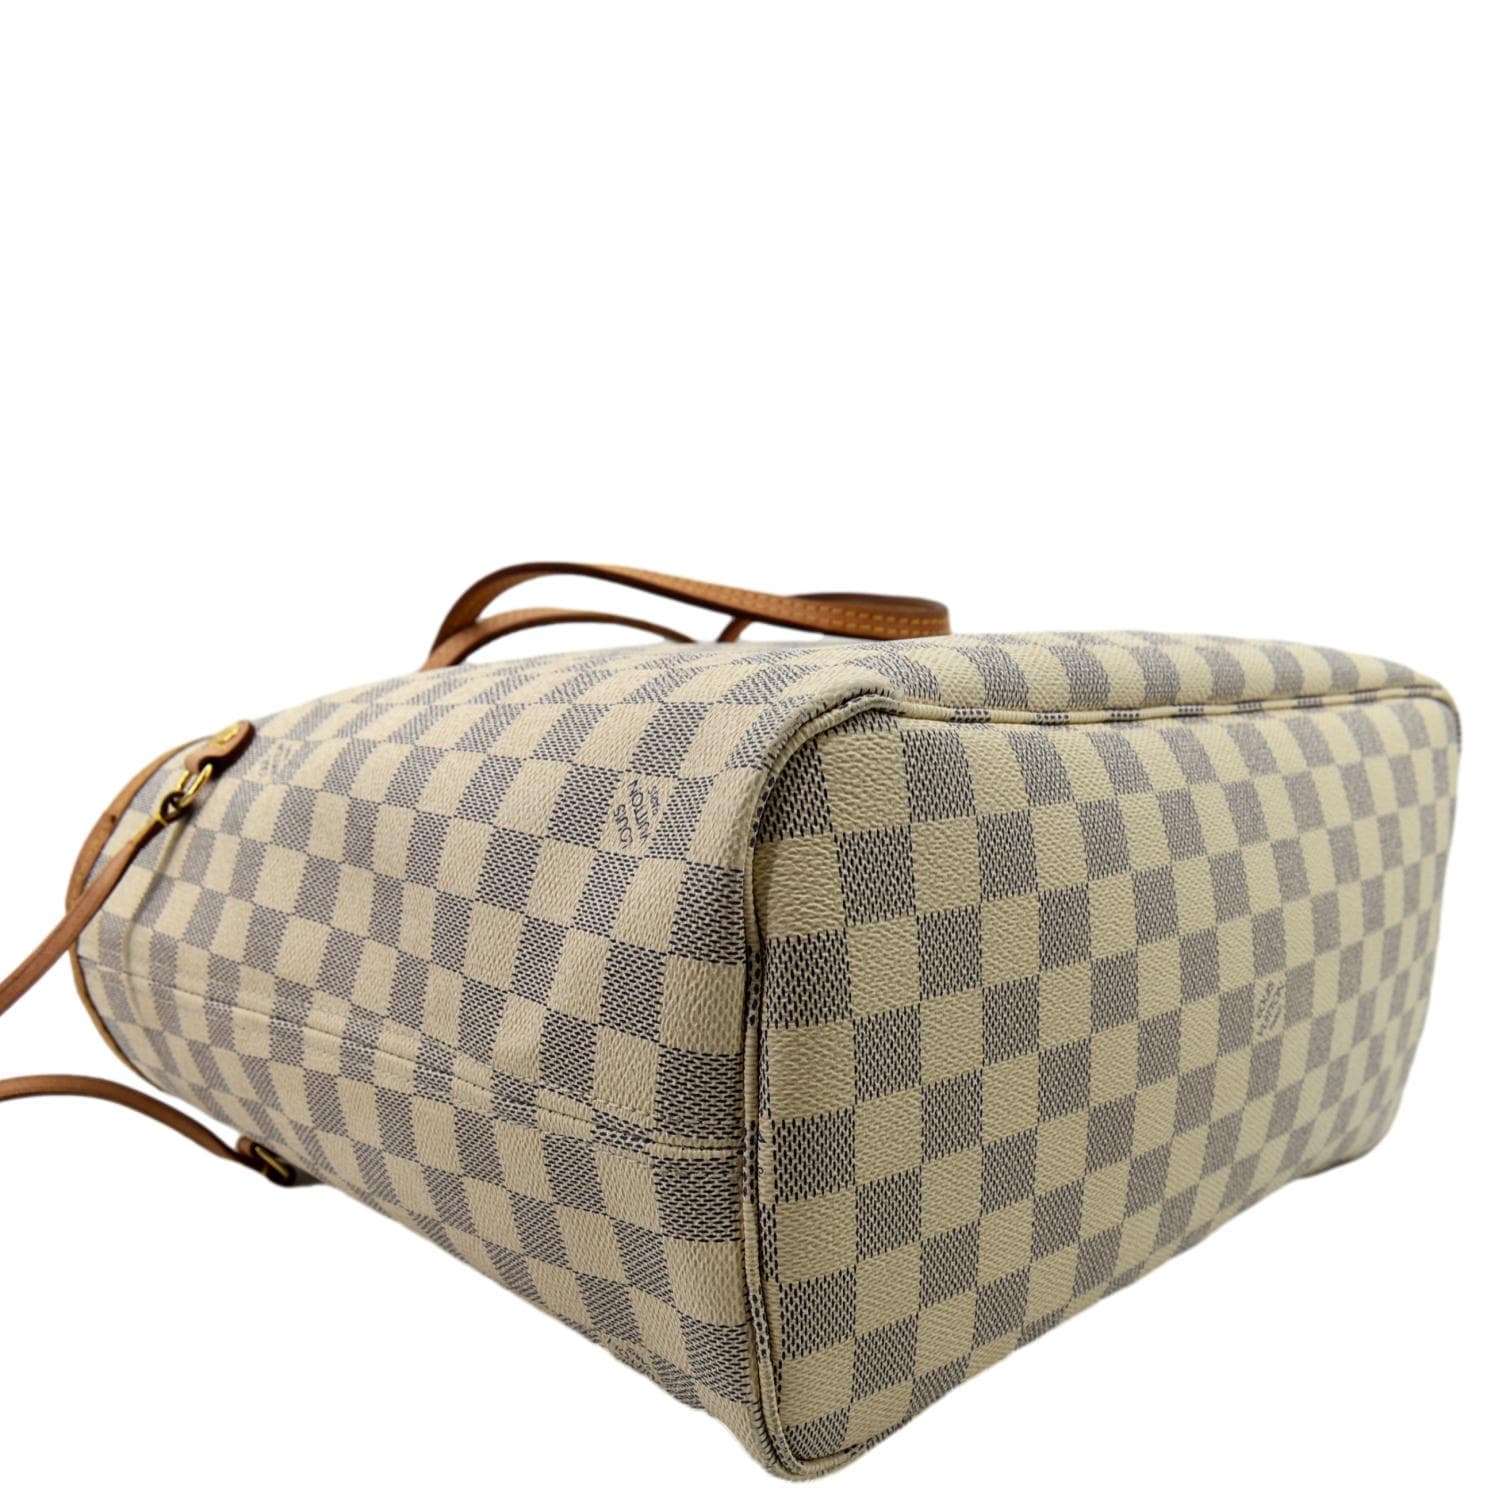 Authentic Louis Vuitton Neverfull MM Tote Bag in Damier Azur